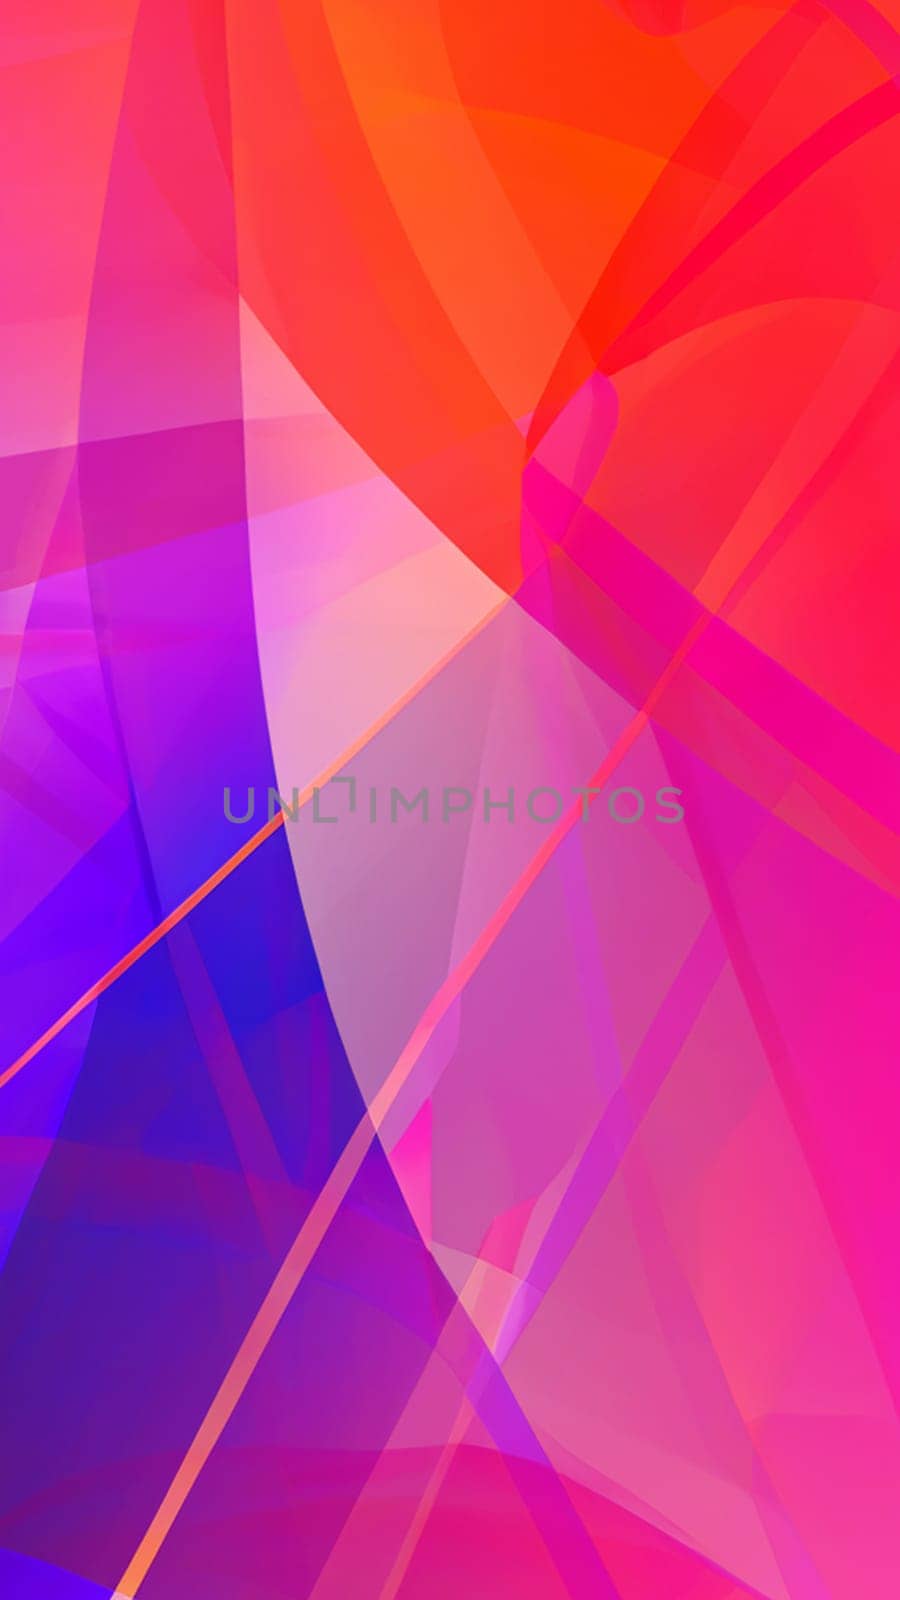 Abstract background with smooth lines in vibrant pink, orange and bright purple colors, portrait by DesignMarjolein